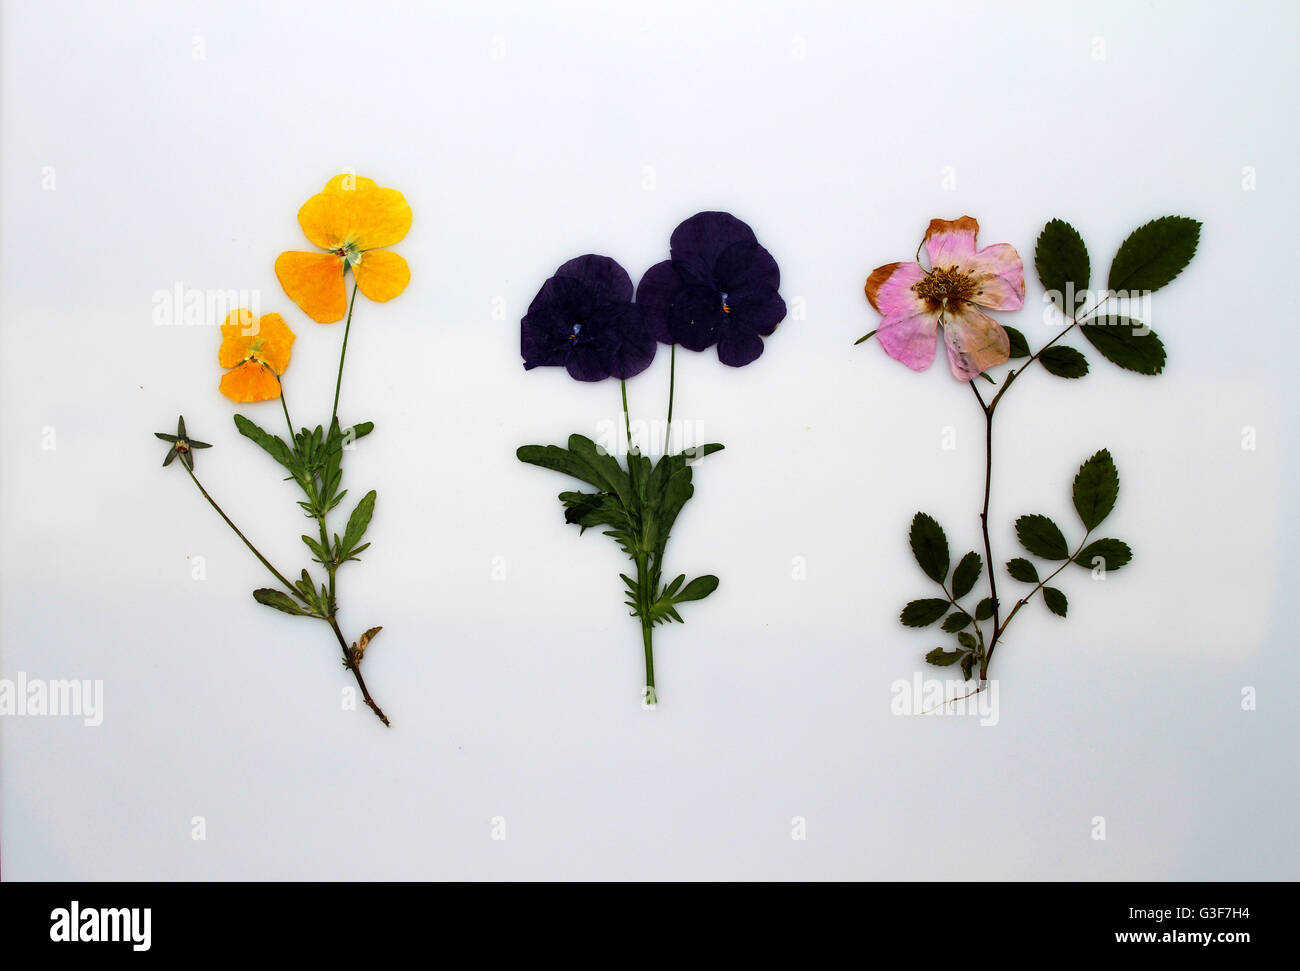 Pressed pansy flowers Stock Photo